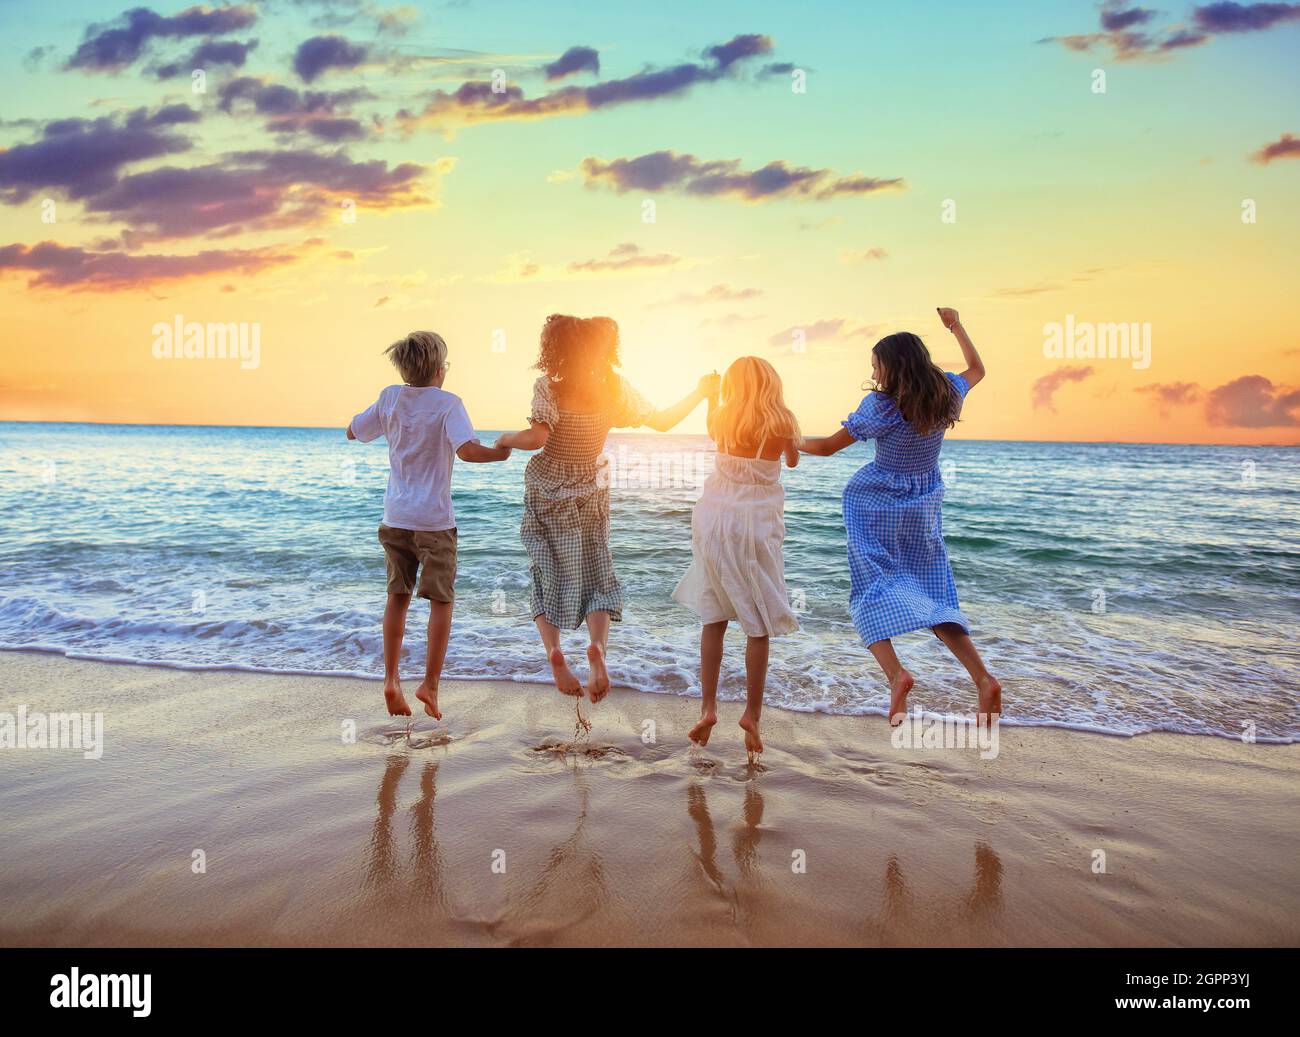 young kids are jumping on the shore of the ocean Stock Photo